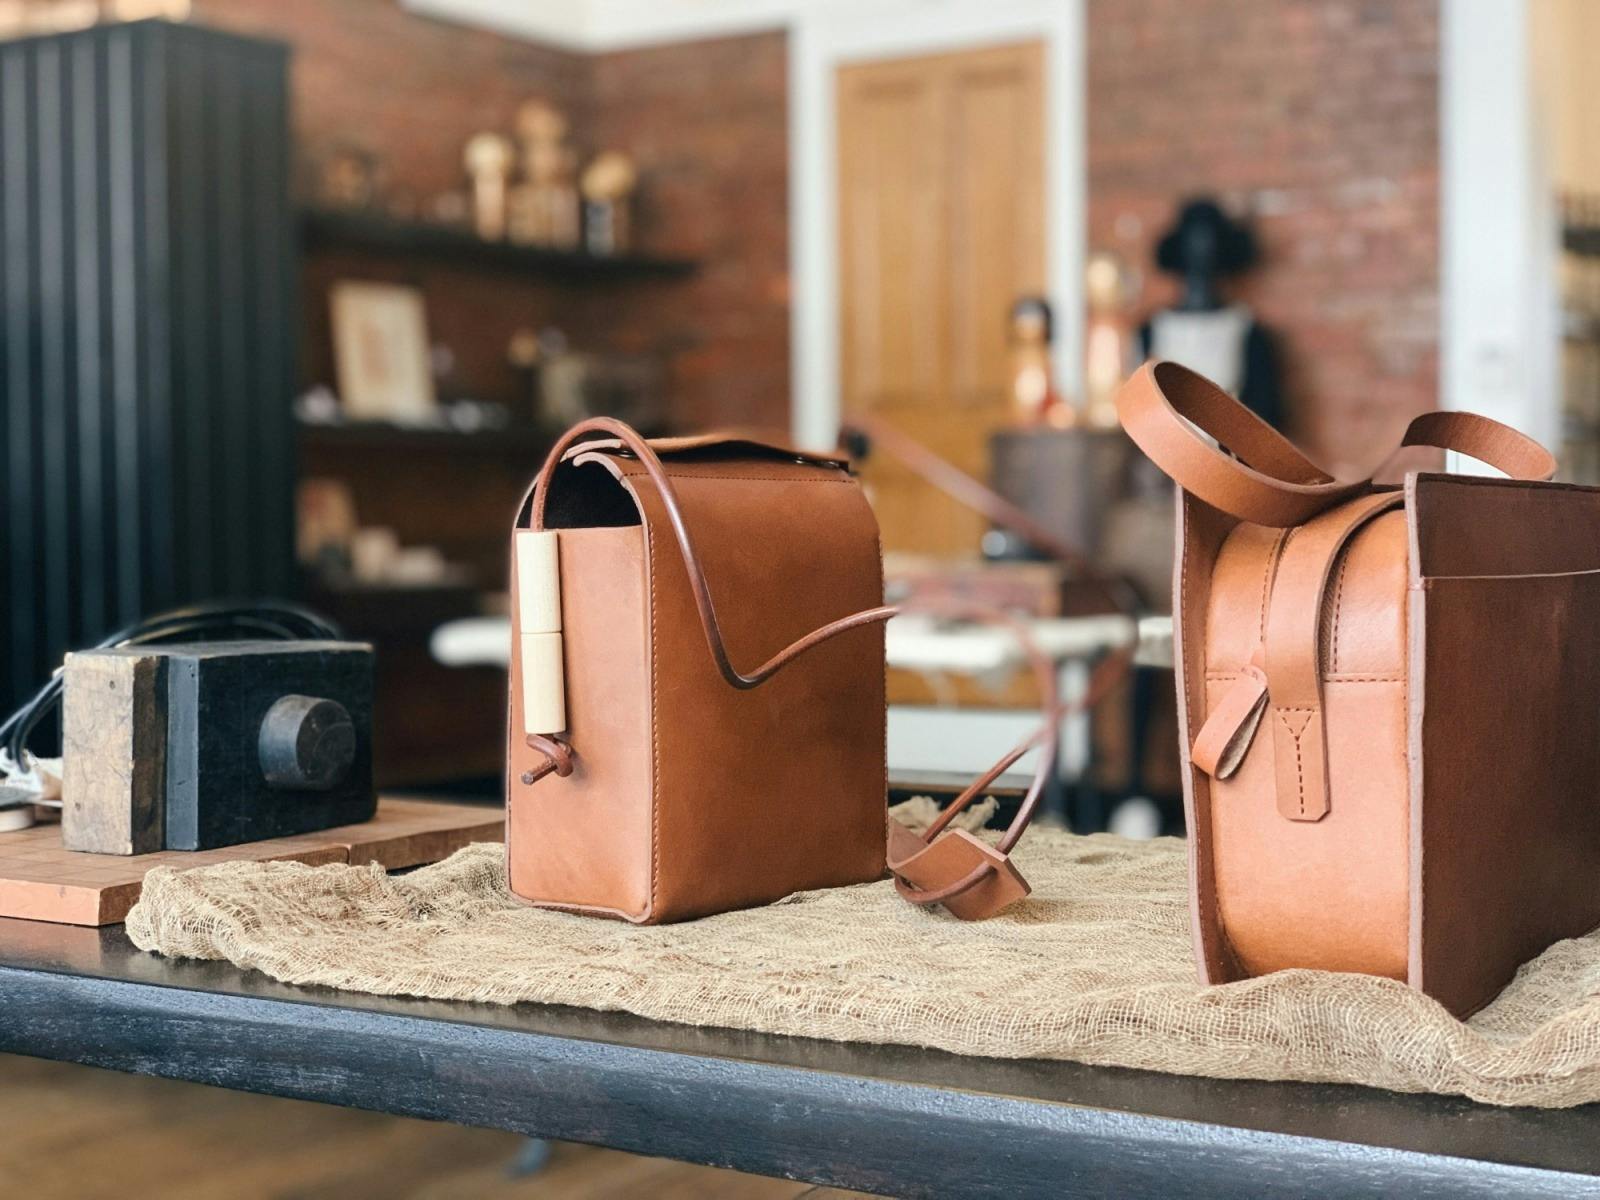 leather goods and accessories at the maker Hobart